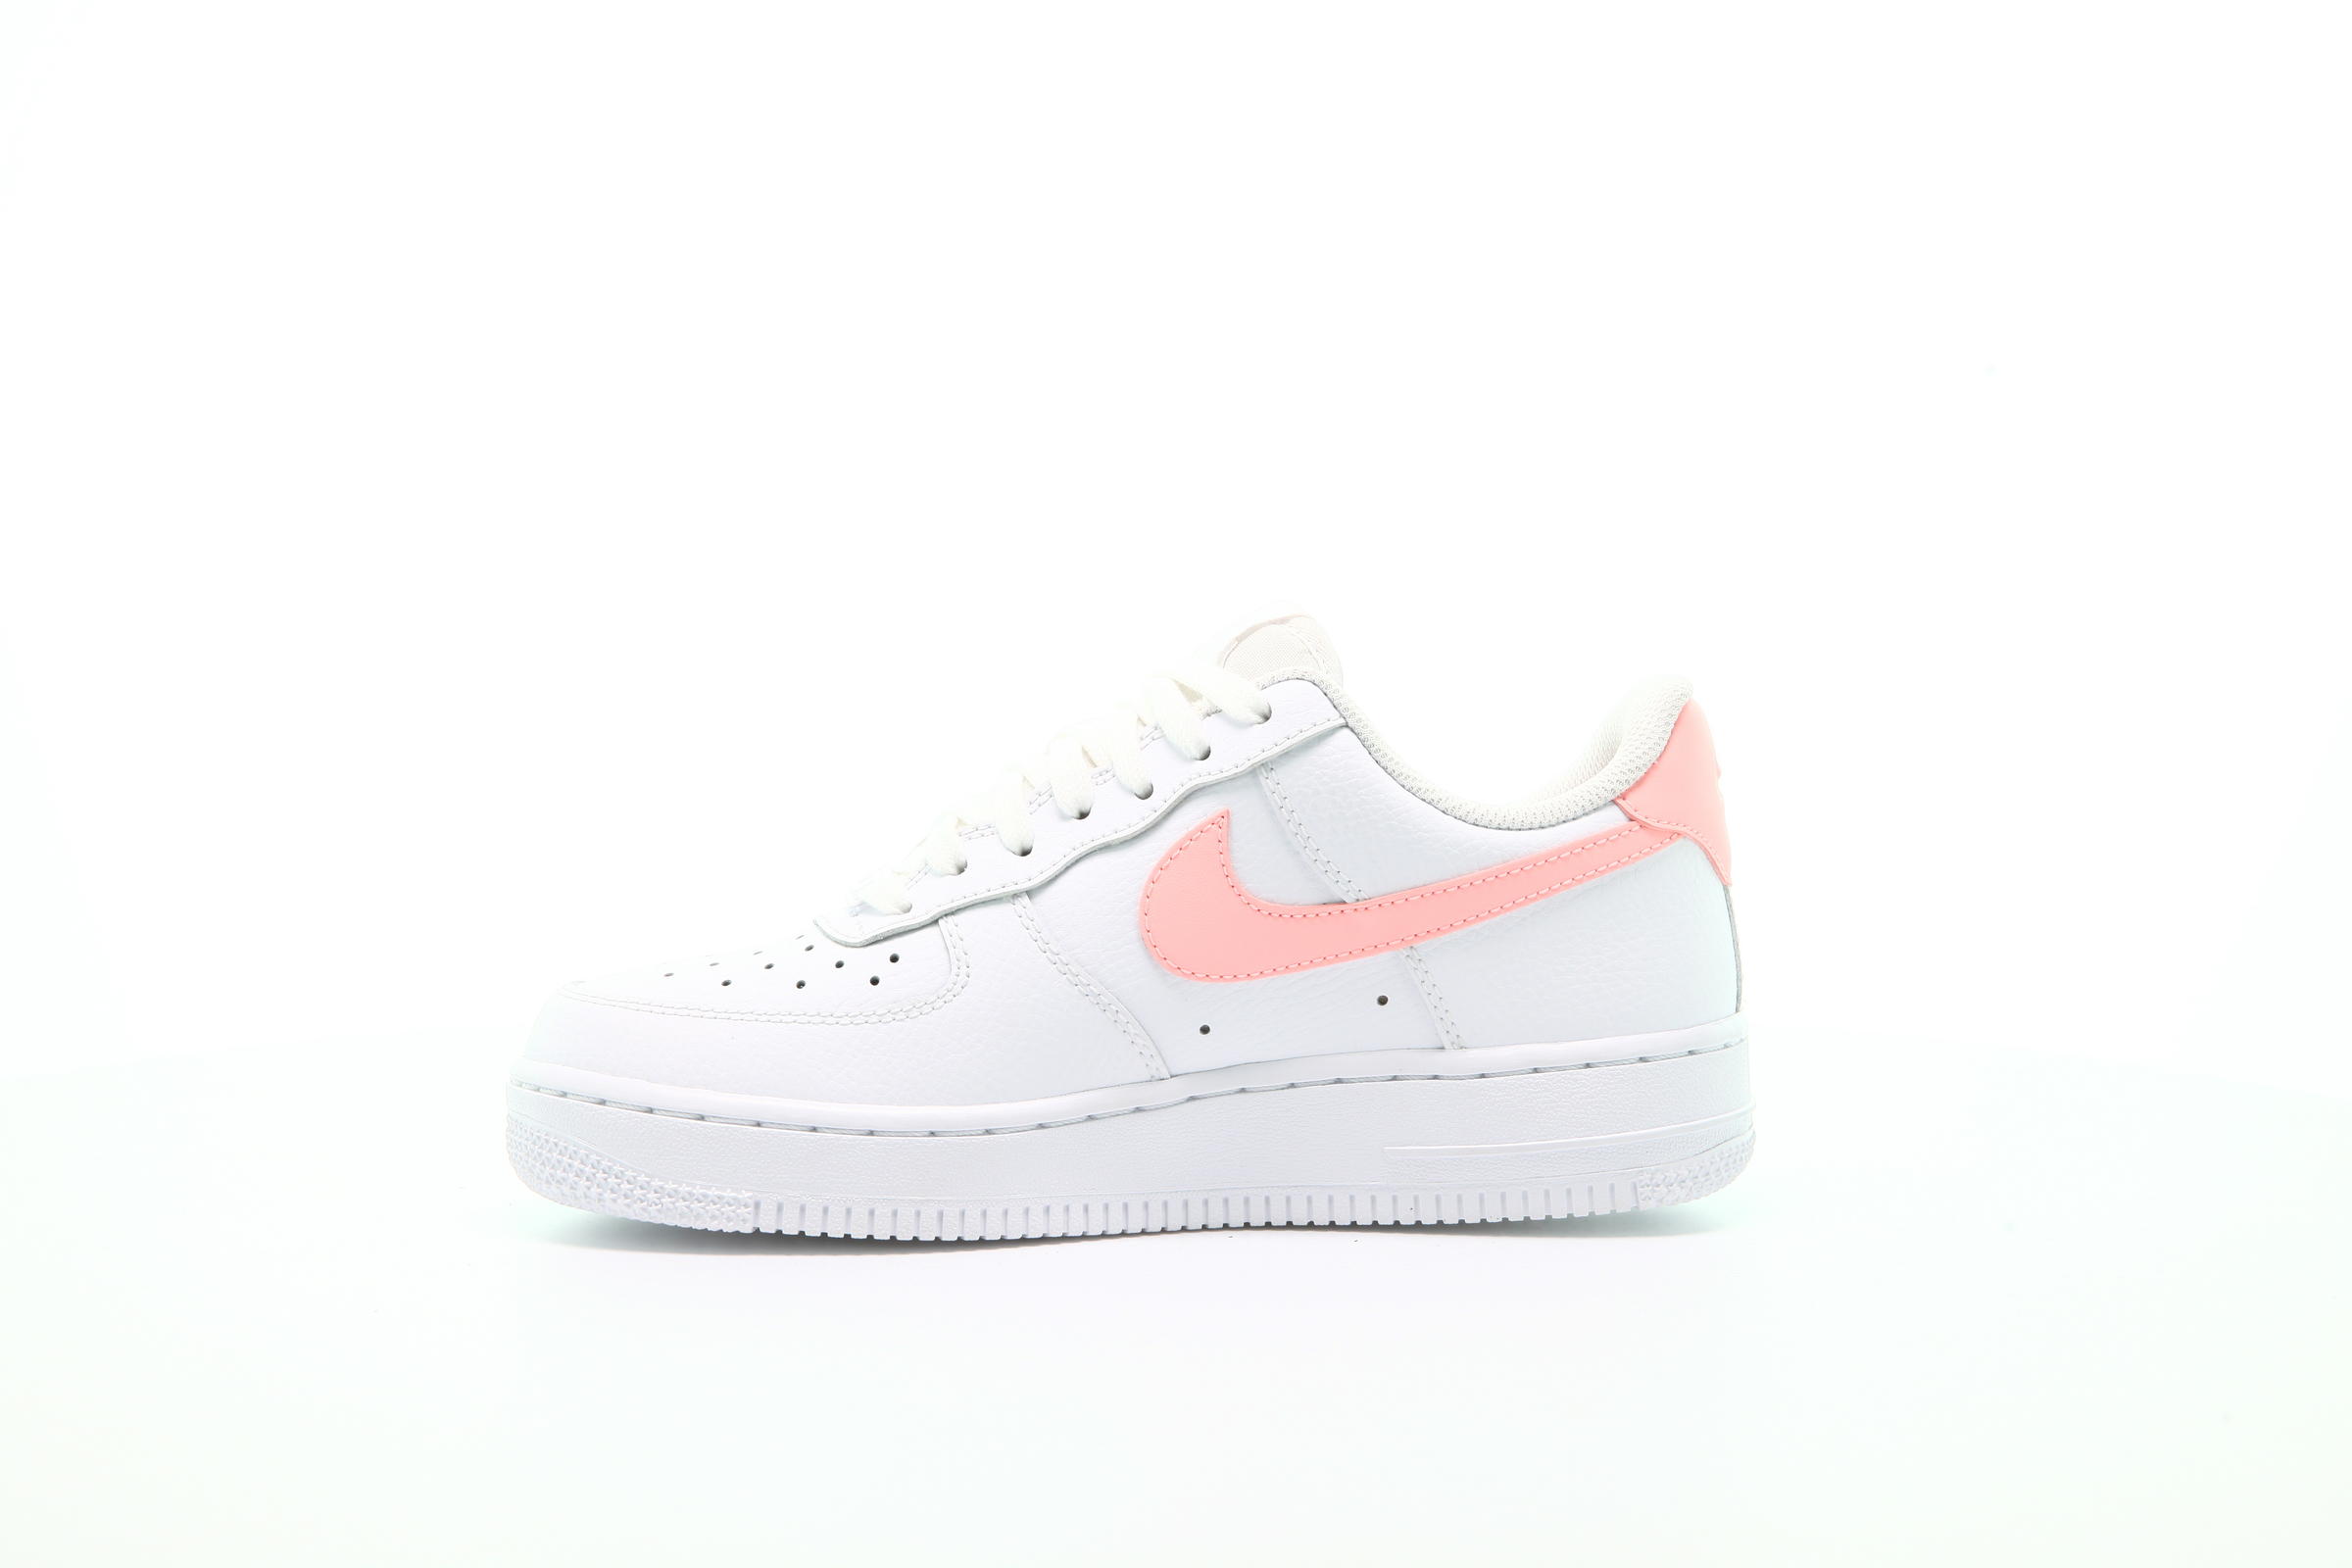 Nike Wmns Air Force 1 07 "Oracle Pink"